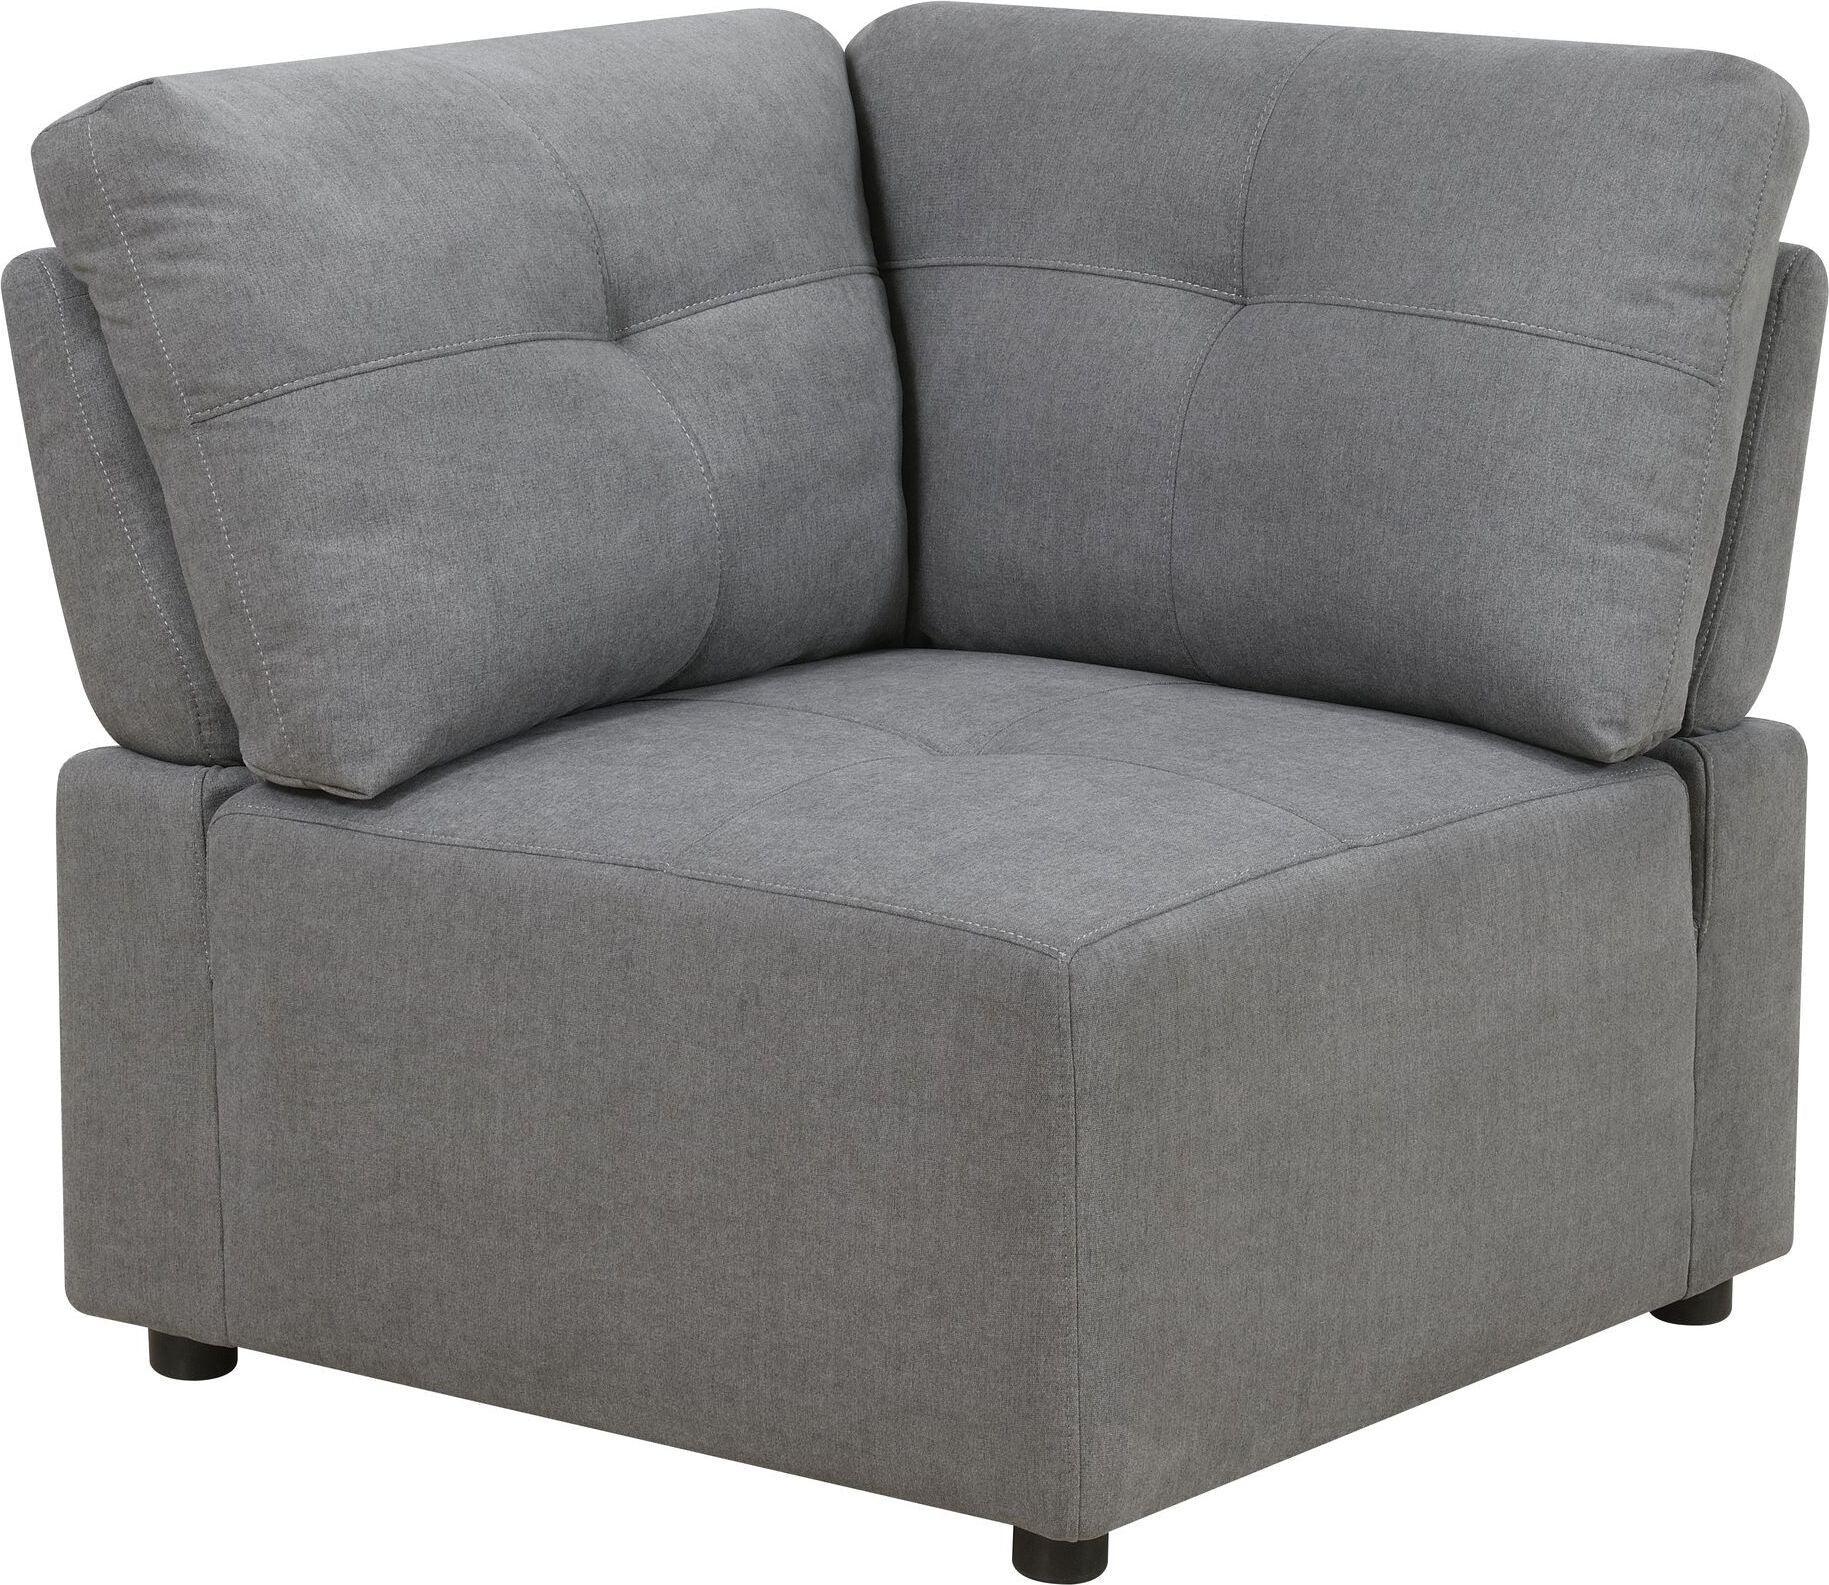 Elements Accent Chairs - Gianni Modular Sectional Corner Charcoal